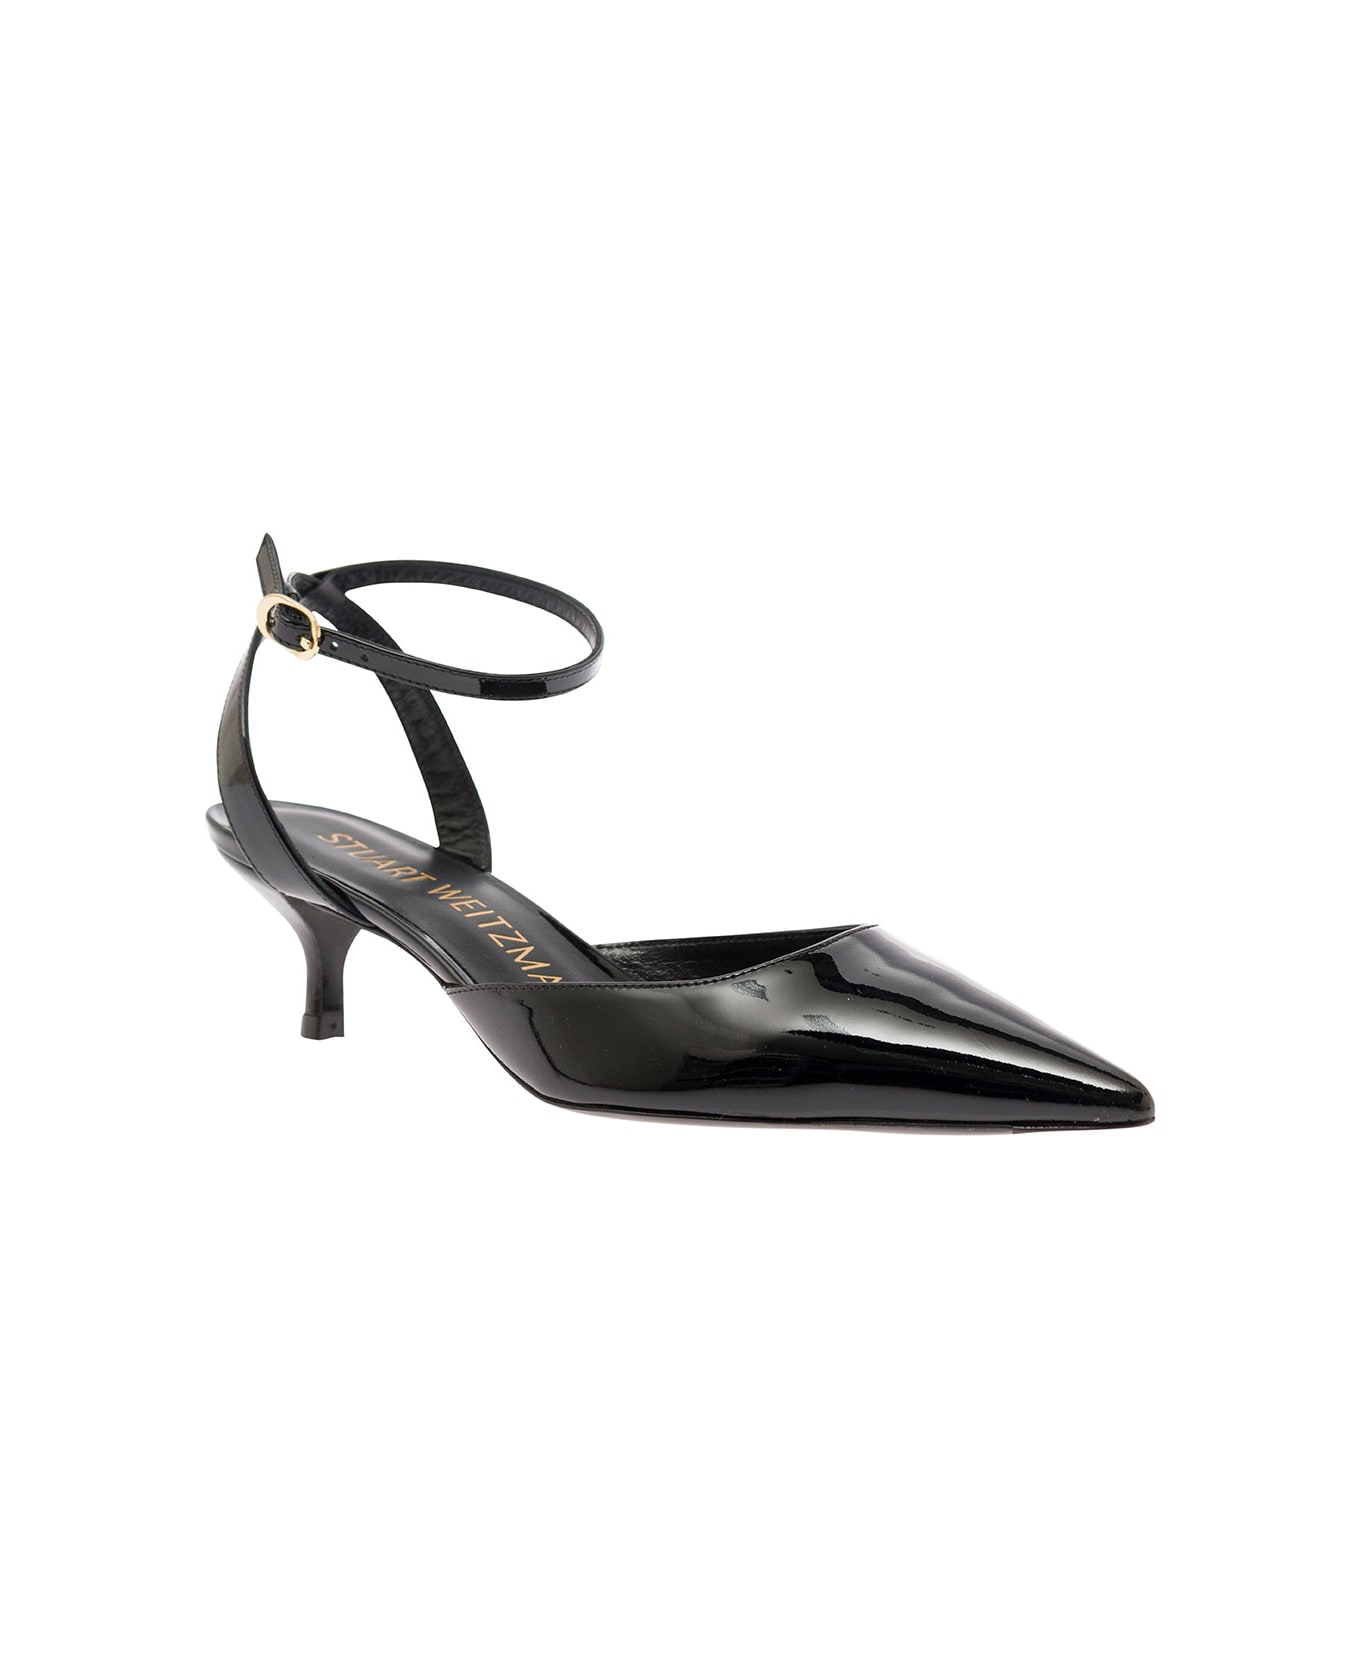 Stuart Weitzman 'barelythere' Black Pumps With Ankle Strap In Patent Leather Woman - Black